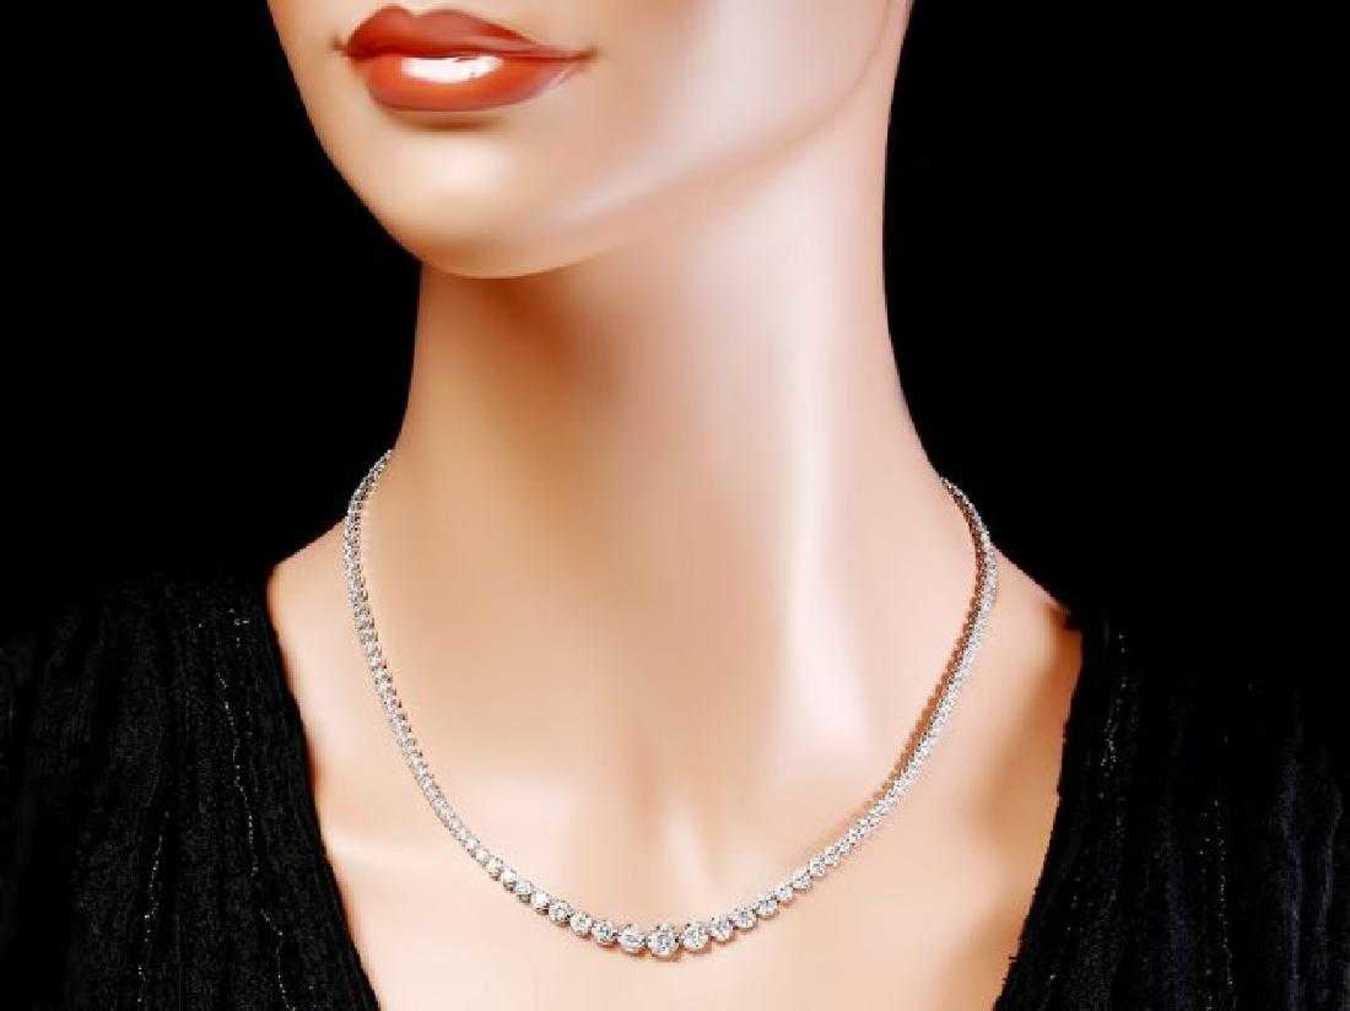 18K White Gold and 6.44ct Diamond Necklace